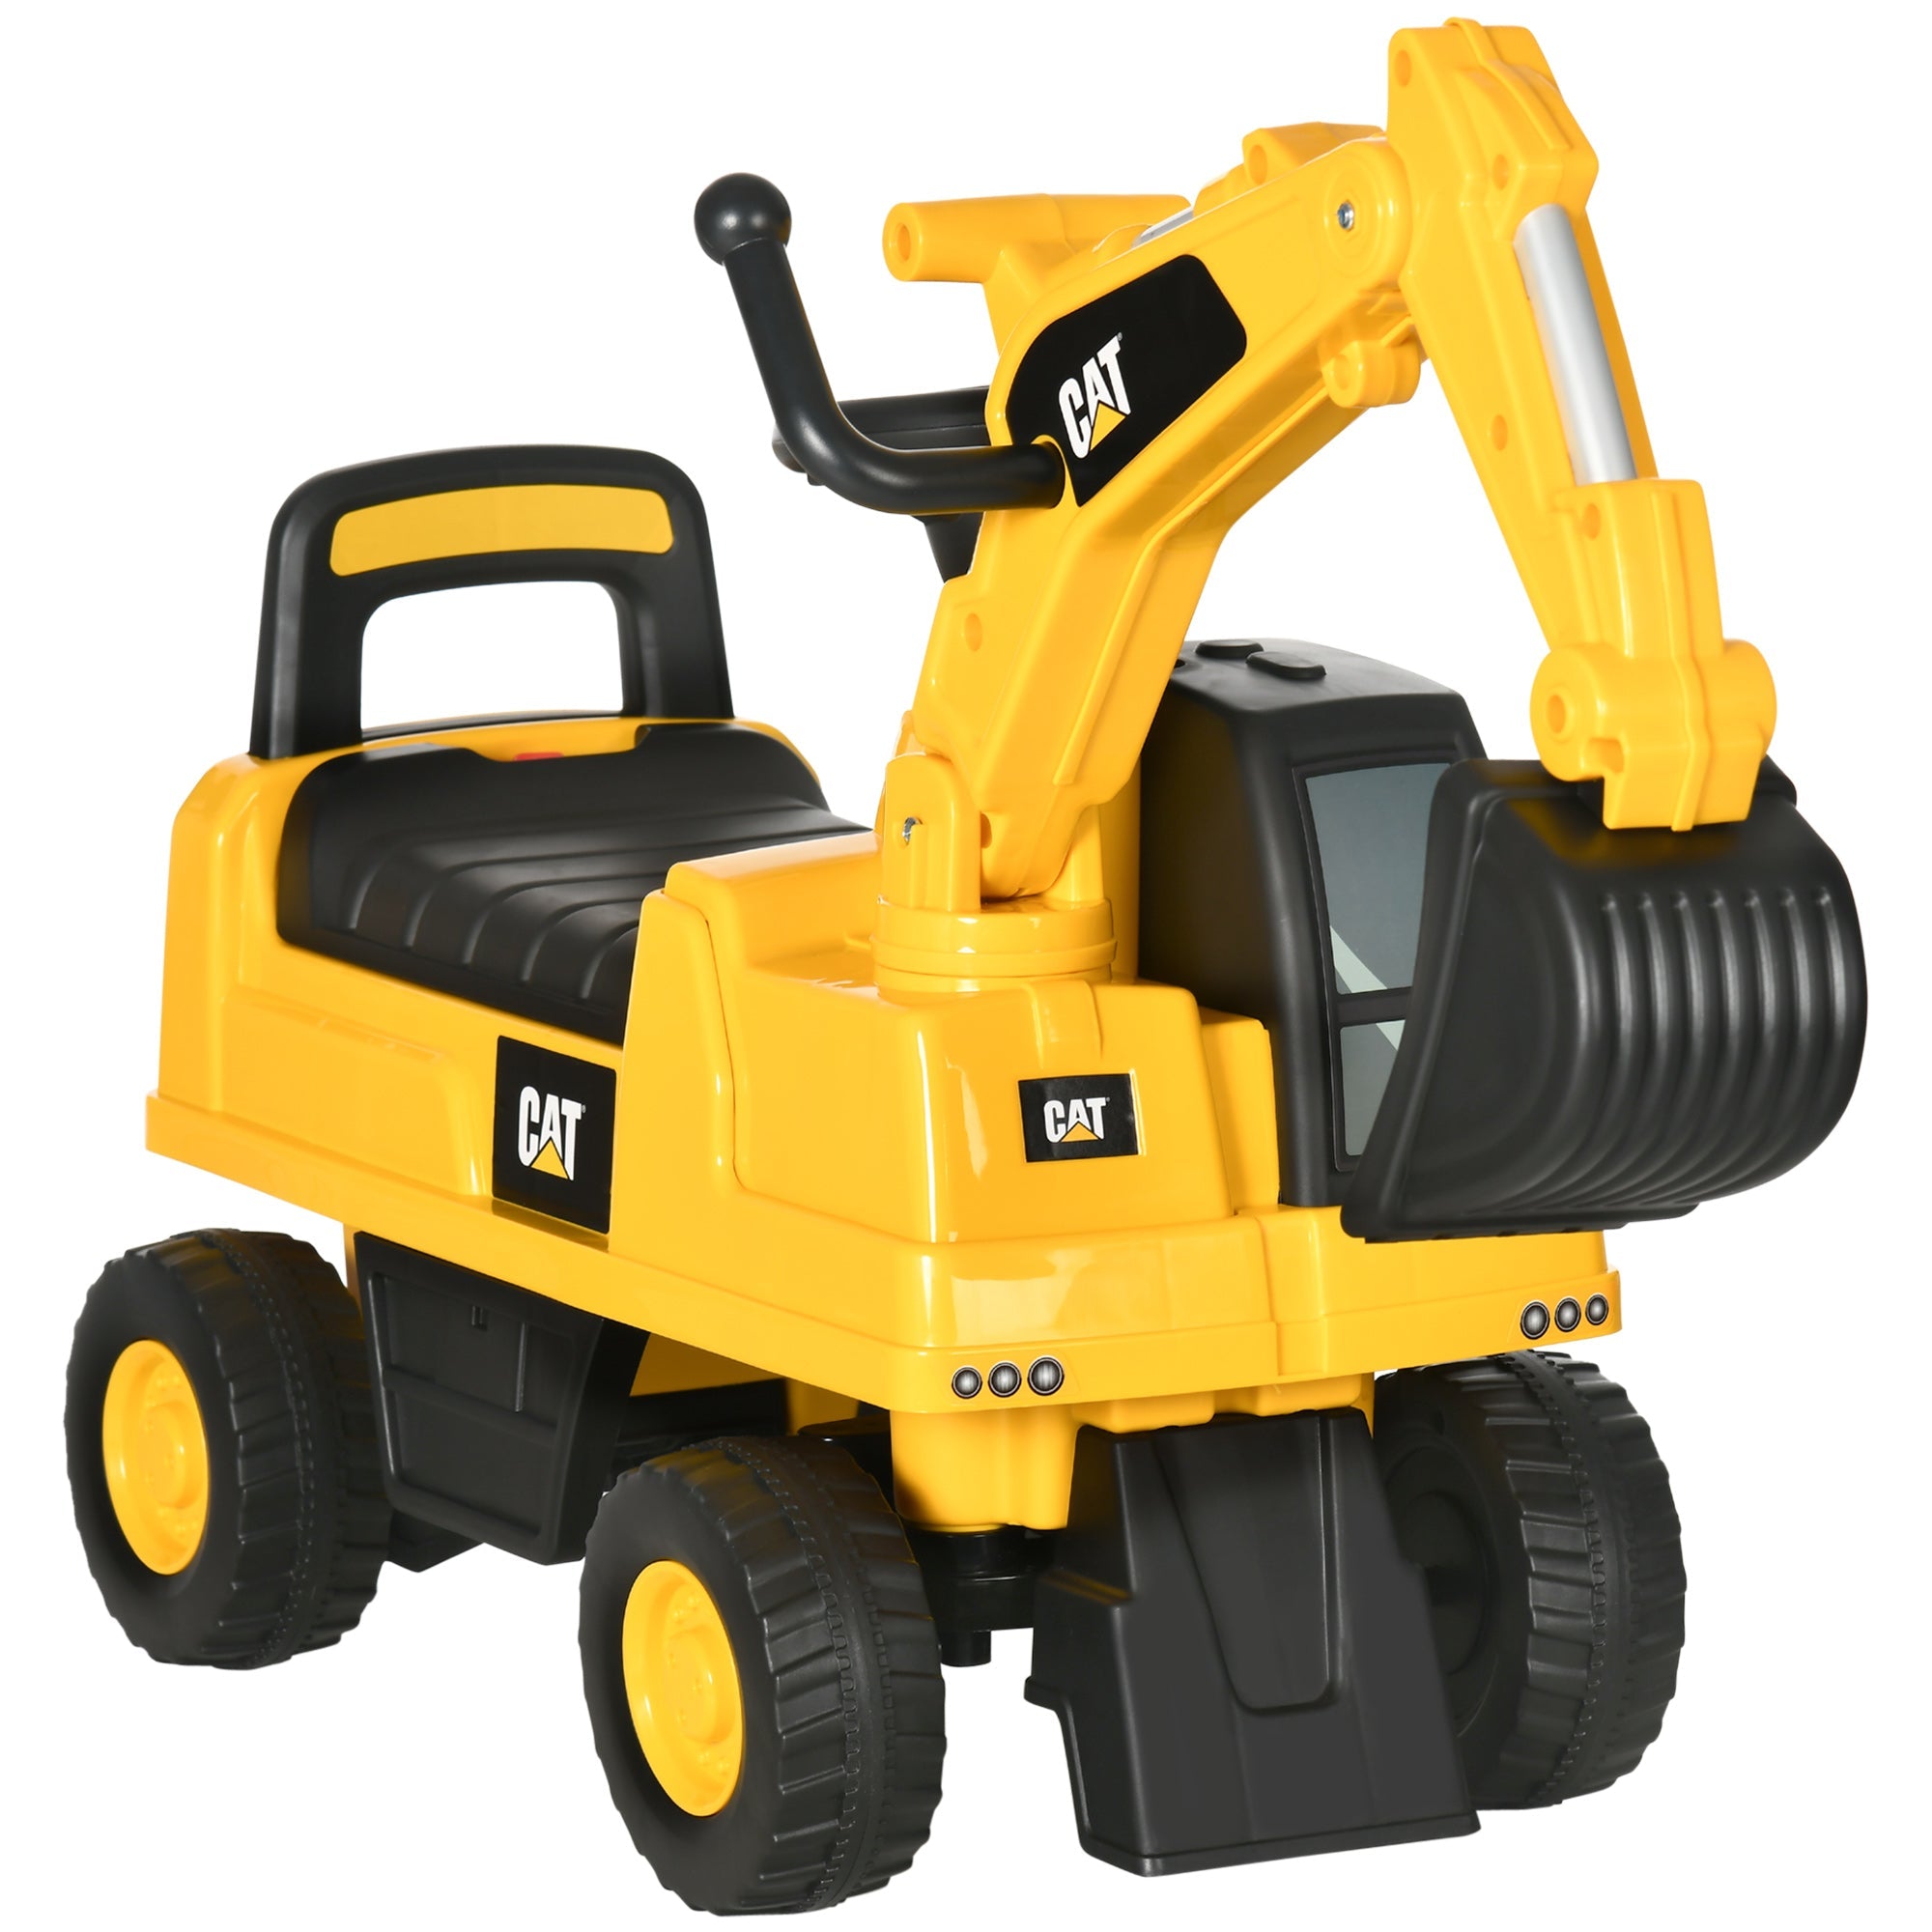 HOMCOM CAT Licensed Kids Ride On Toy Digger with Manual Shovel & Horn for Ages 1-3 Years